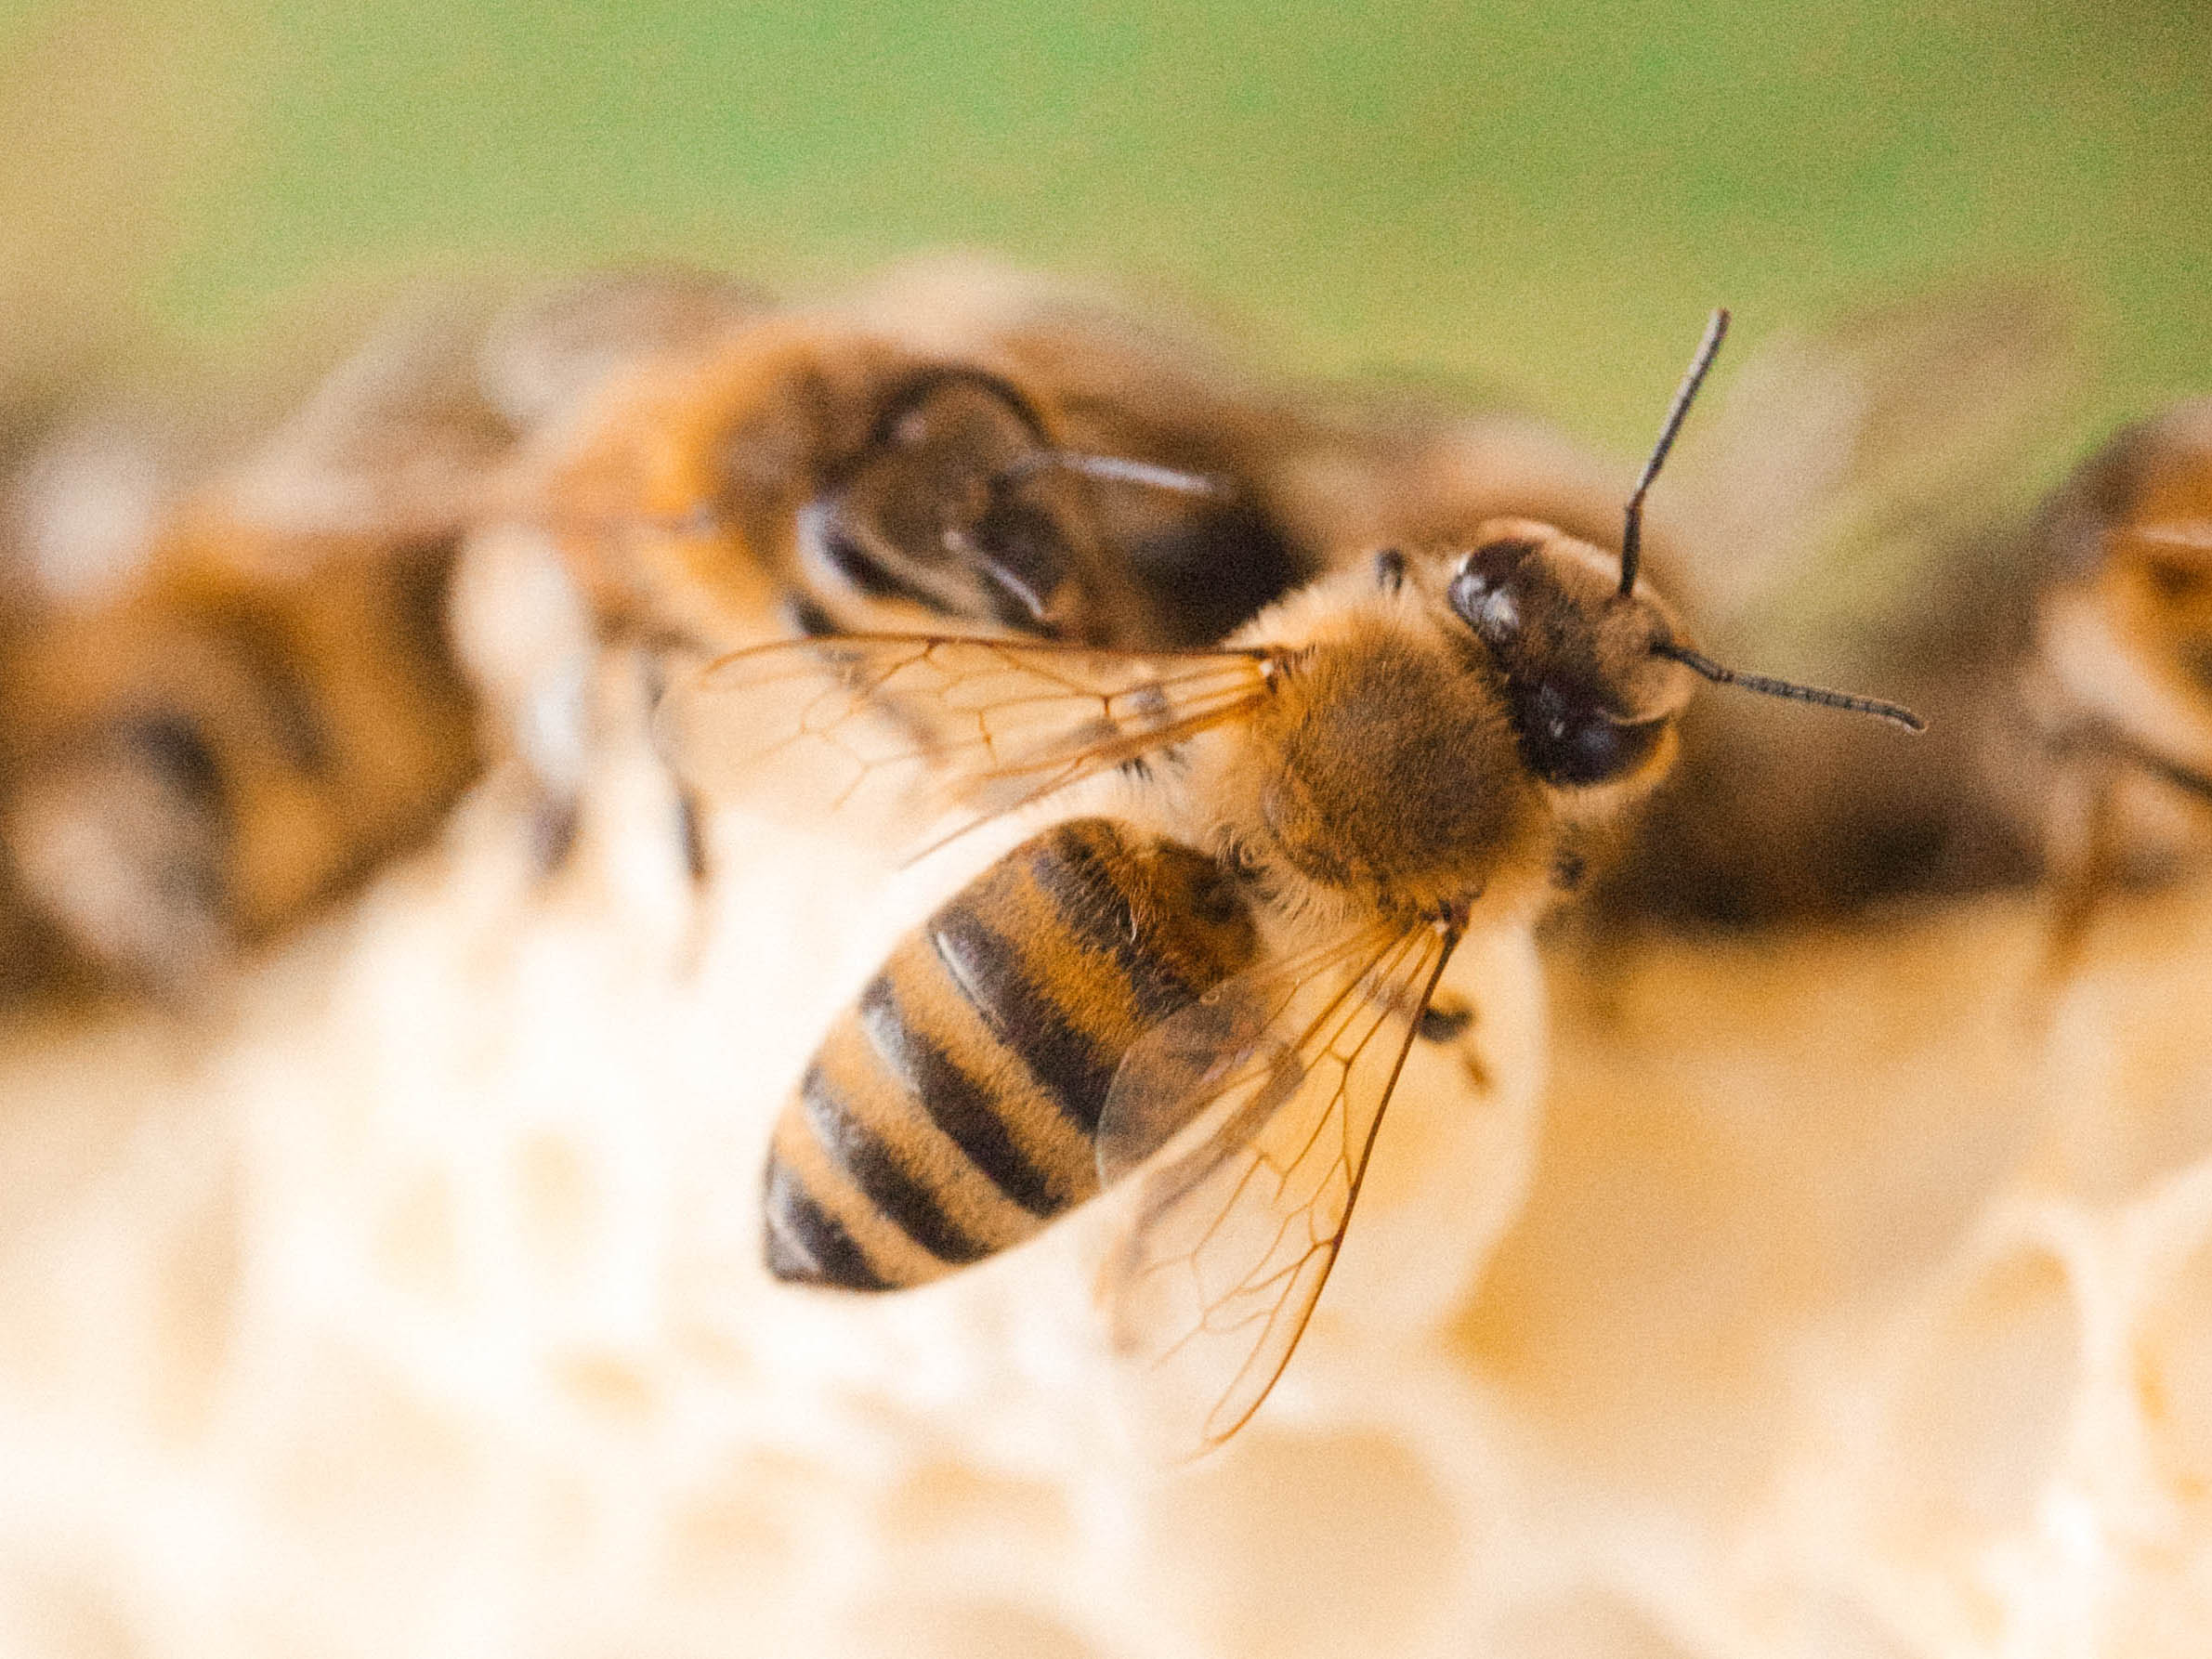 FABQs: How Else Can I Help Honey Bees? - by Bee & Bloom